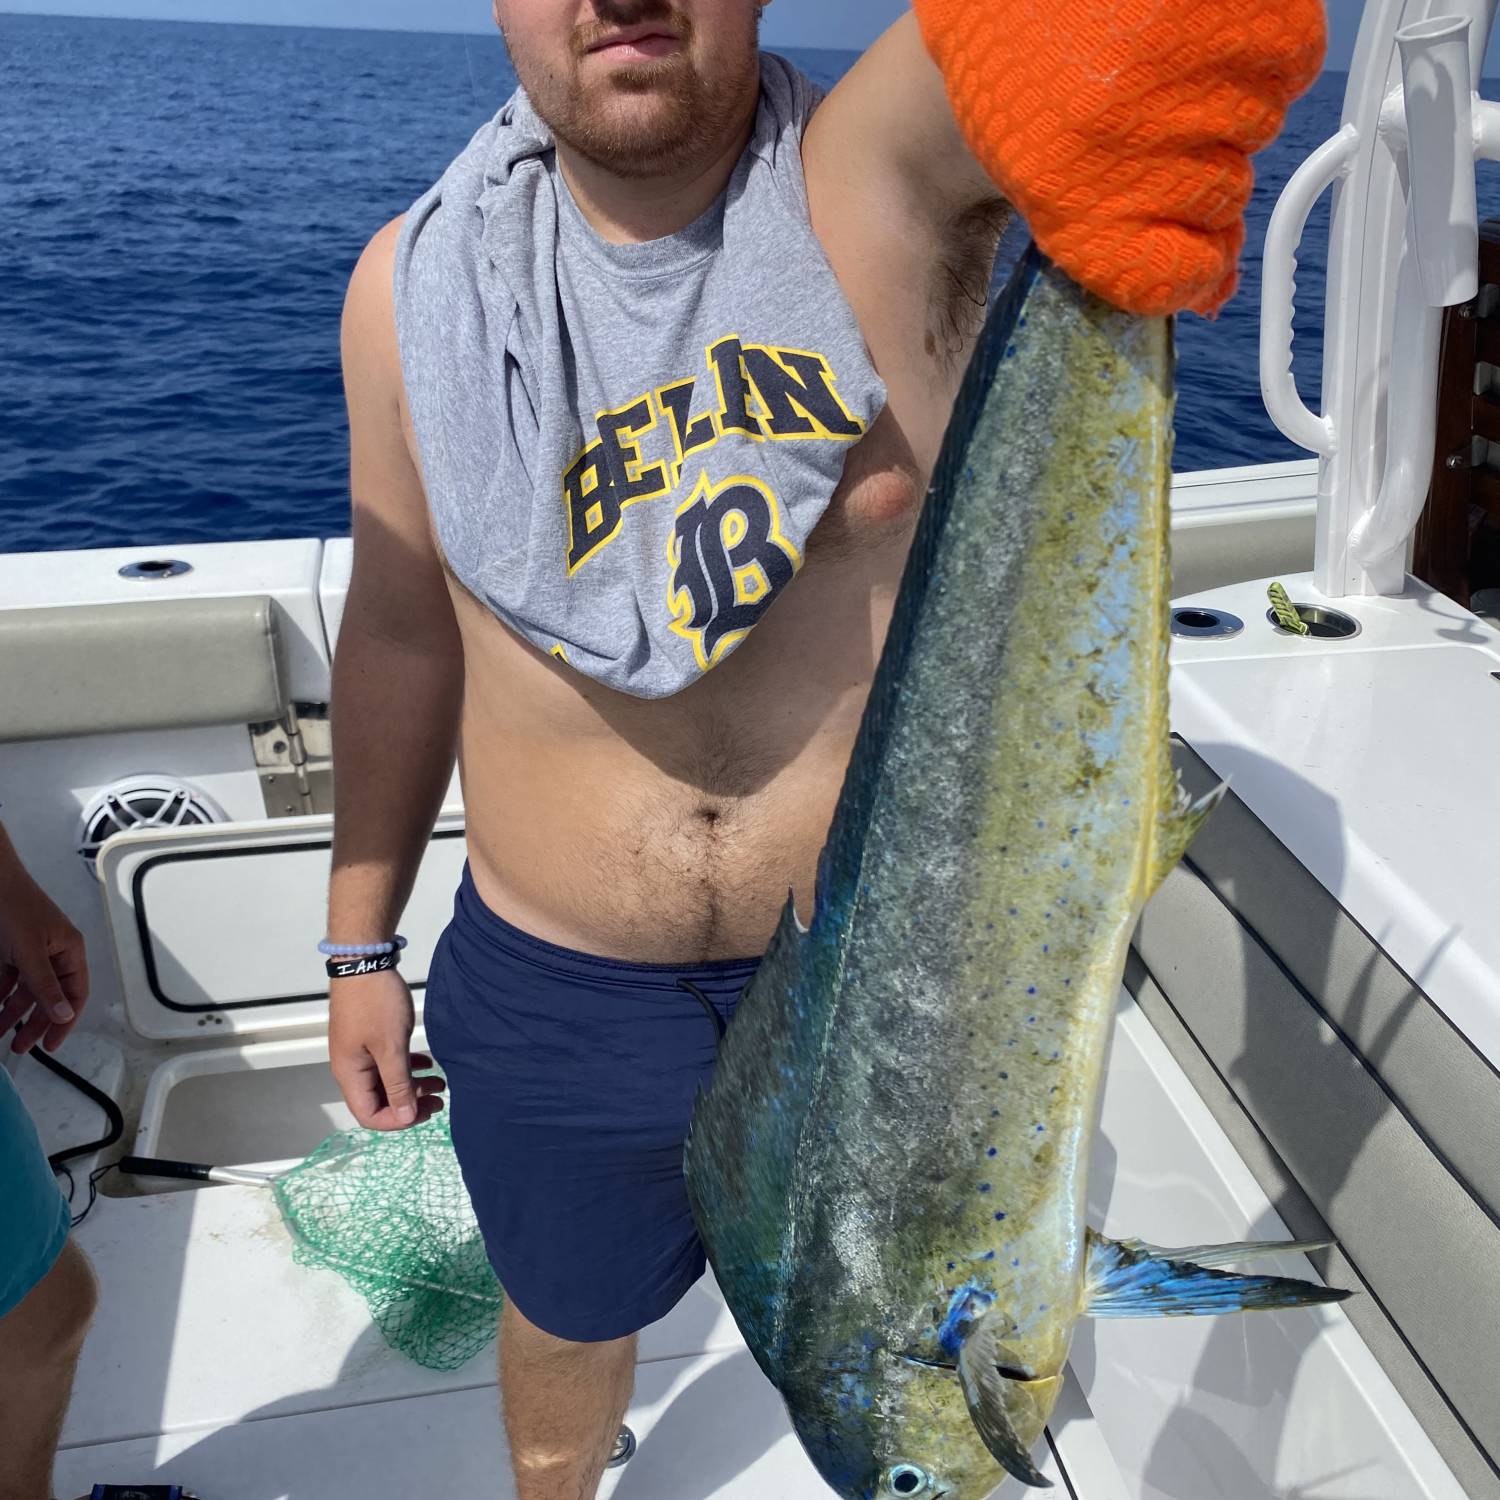 Title: Let’s go fishing - On board their Sportsman Open 352 Center Console - Location: Offshore key largo. Participating in the Photo Contest #SportsmanAugust2023